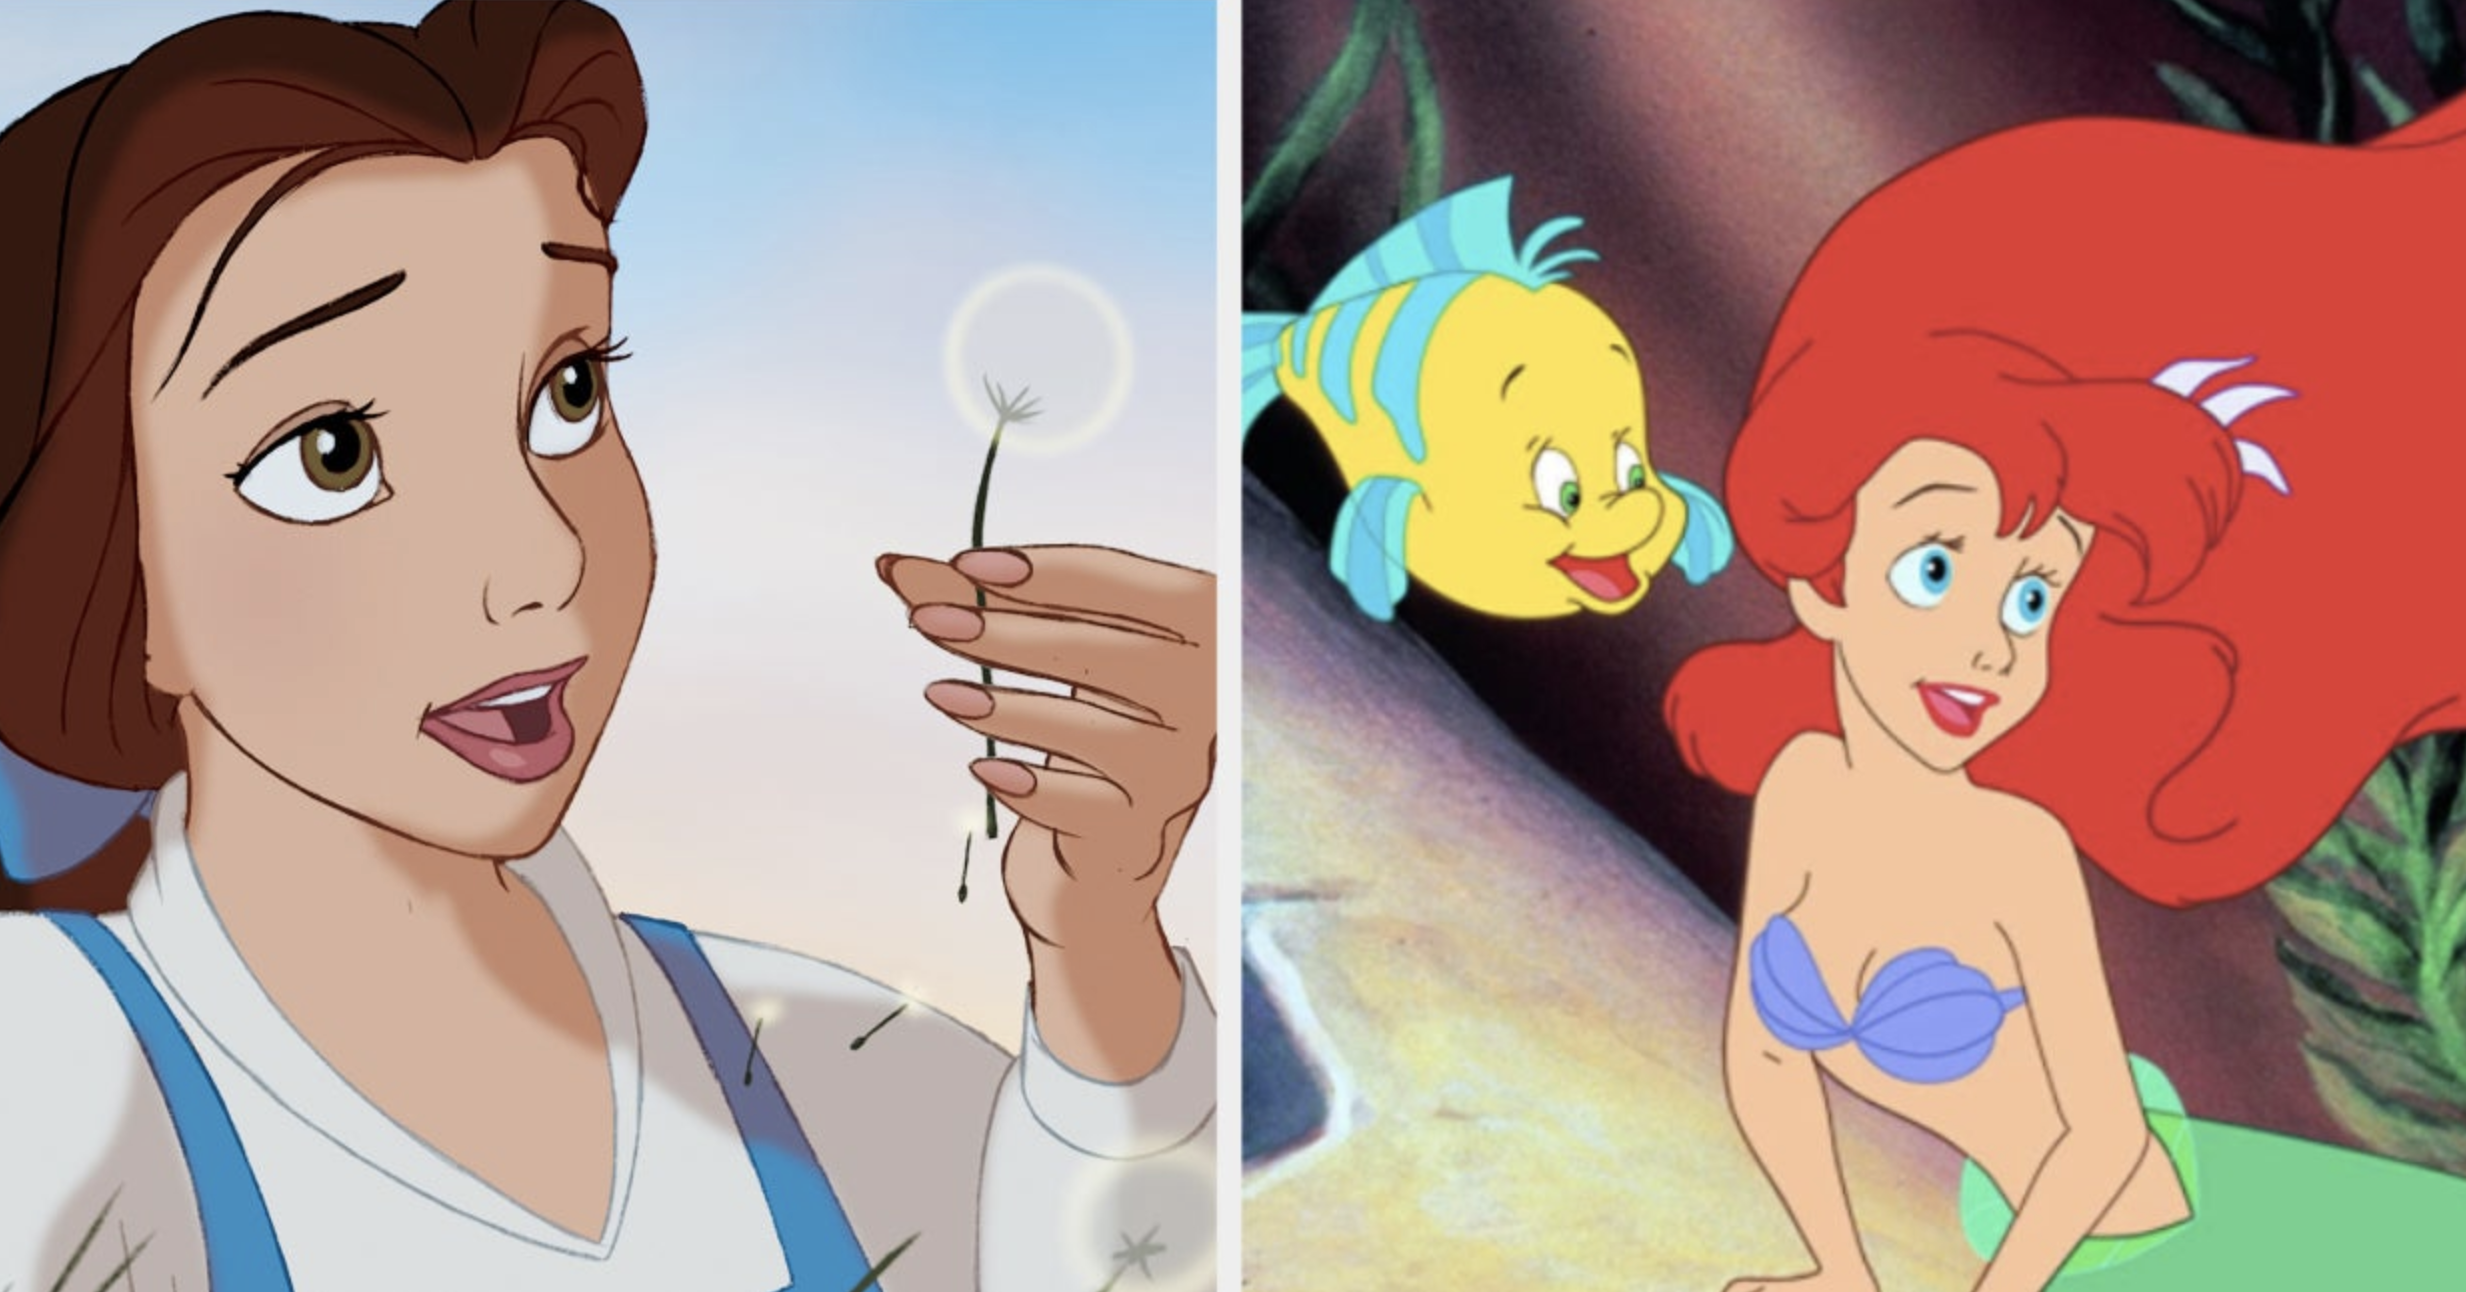 two images: on the left is animated belle holding a wish flower, on the right is animated ariel and flounder